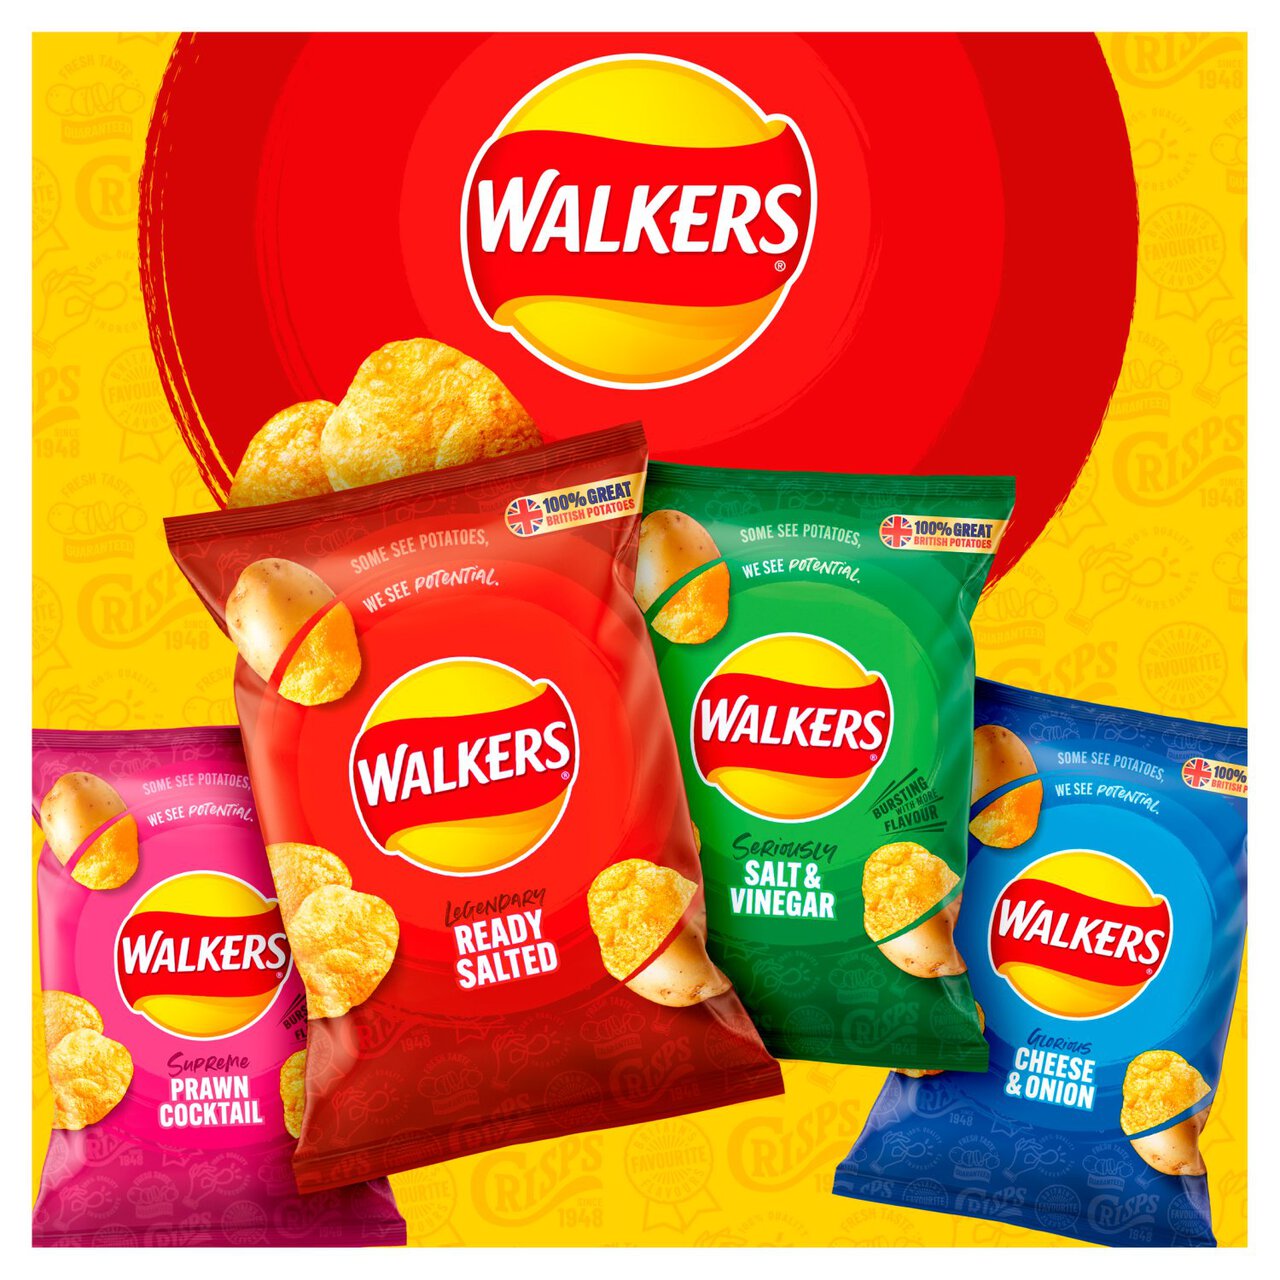 Walkers Cheese & Onion Multipack Crisps 6 per pack